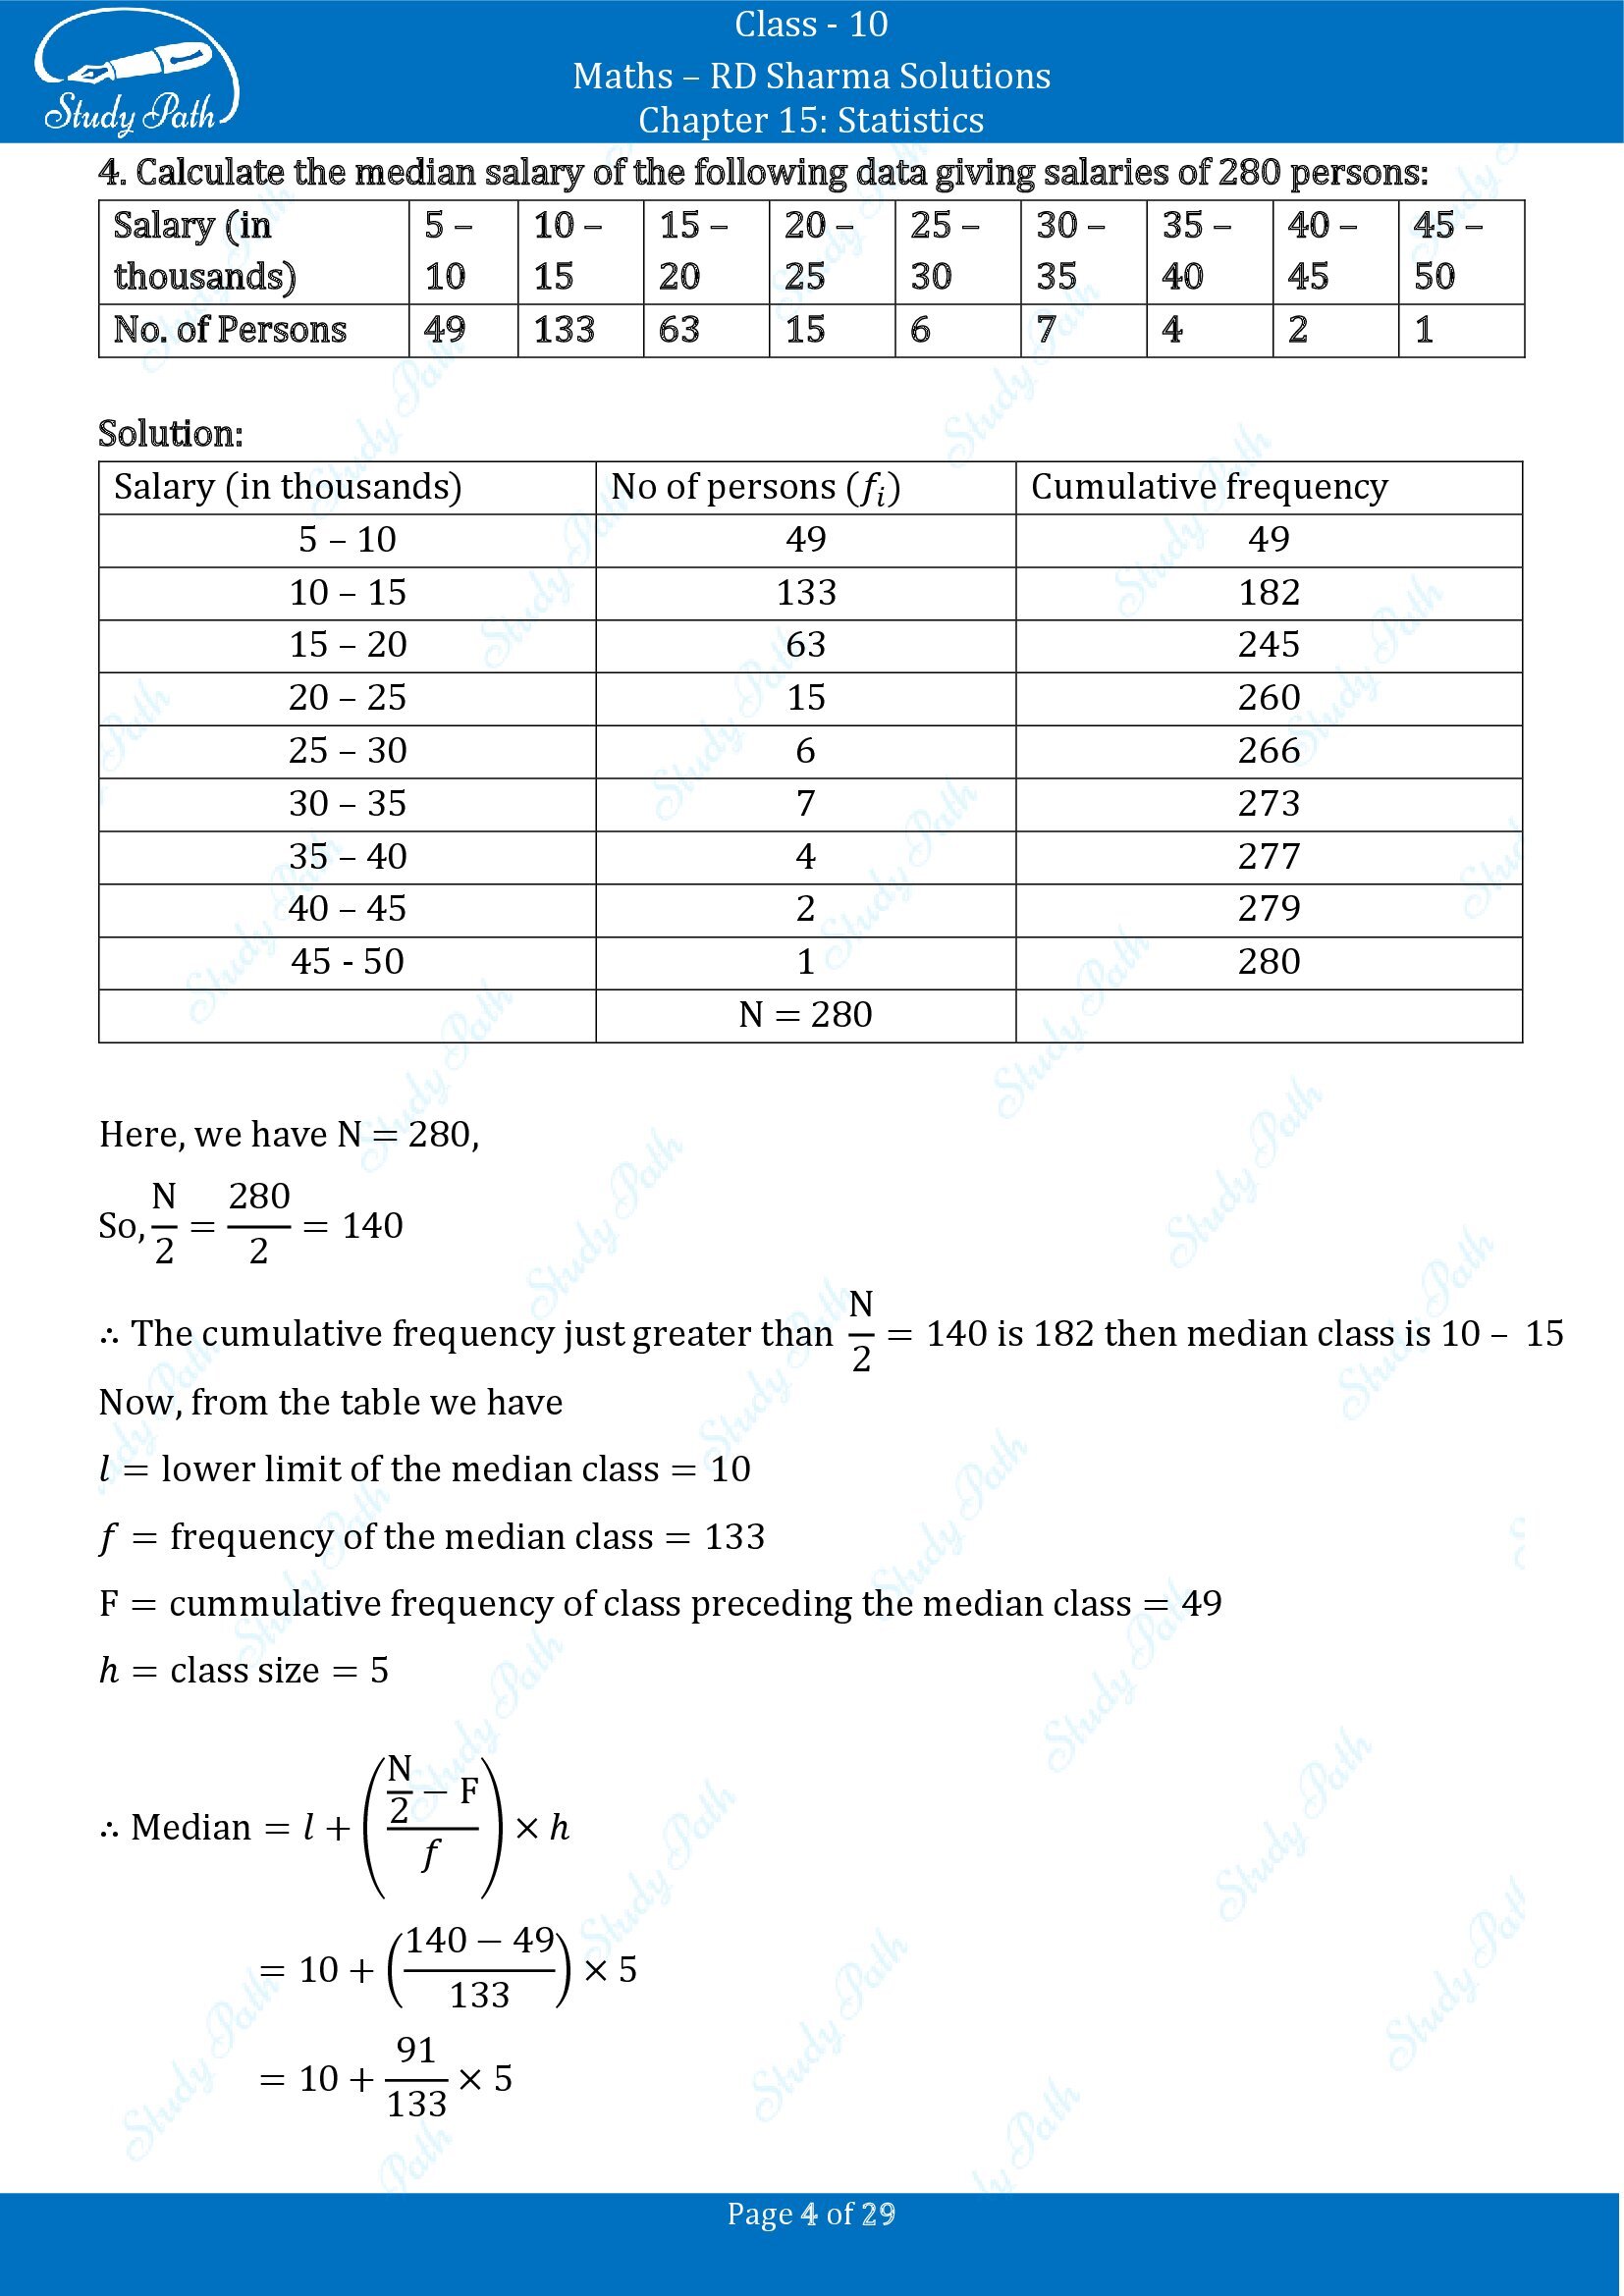 RD Sharma Solutions Class 10 Chapter 15 Statistics Exercise 15.4 00004